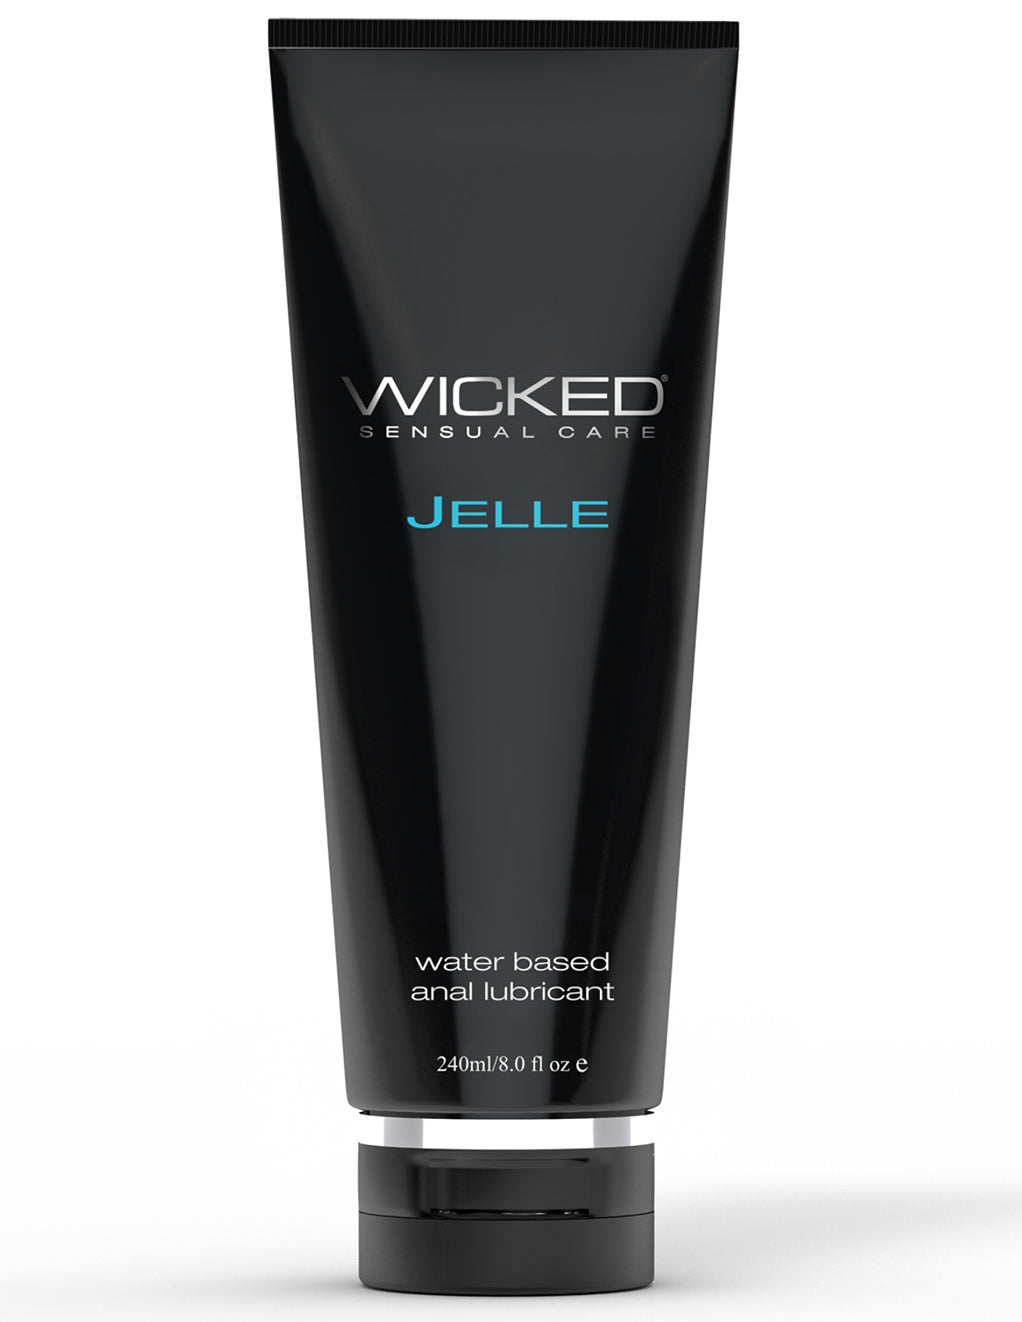 Wicked Jelle Water-based Anal Lubricant- 8oz- front